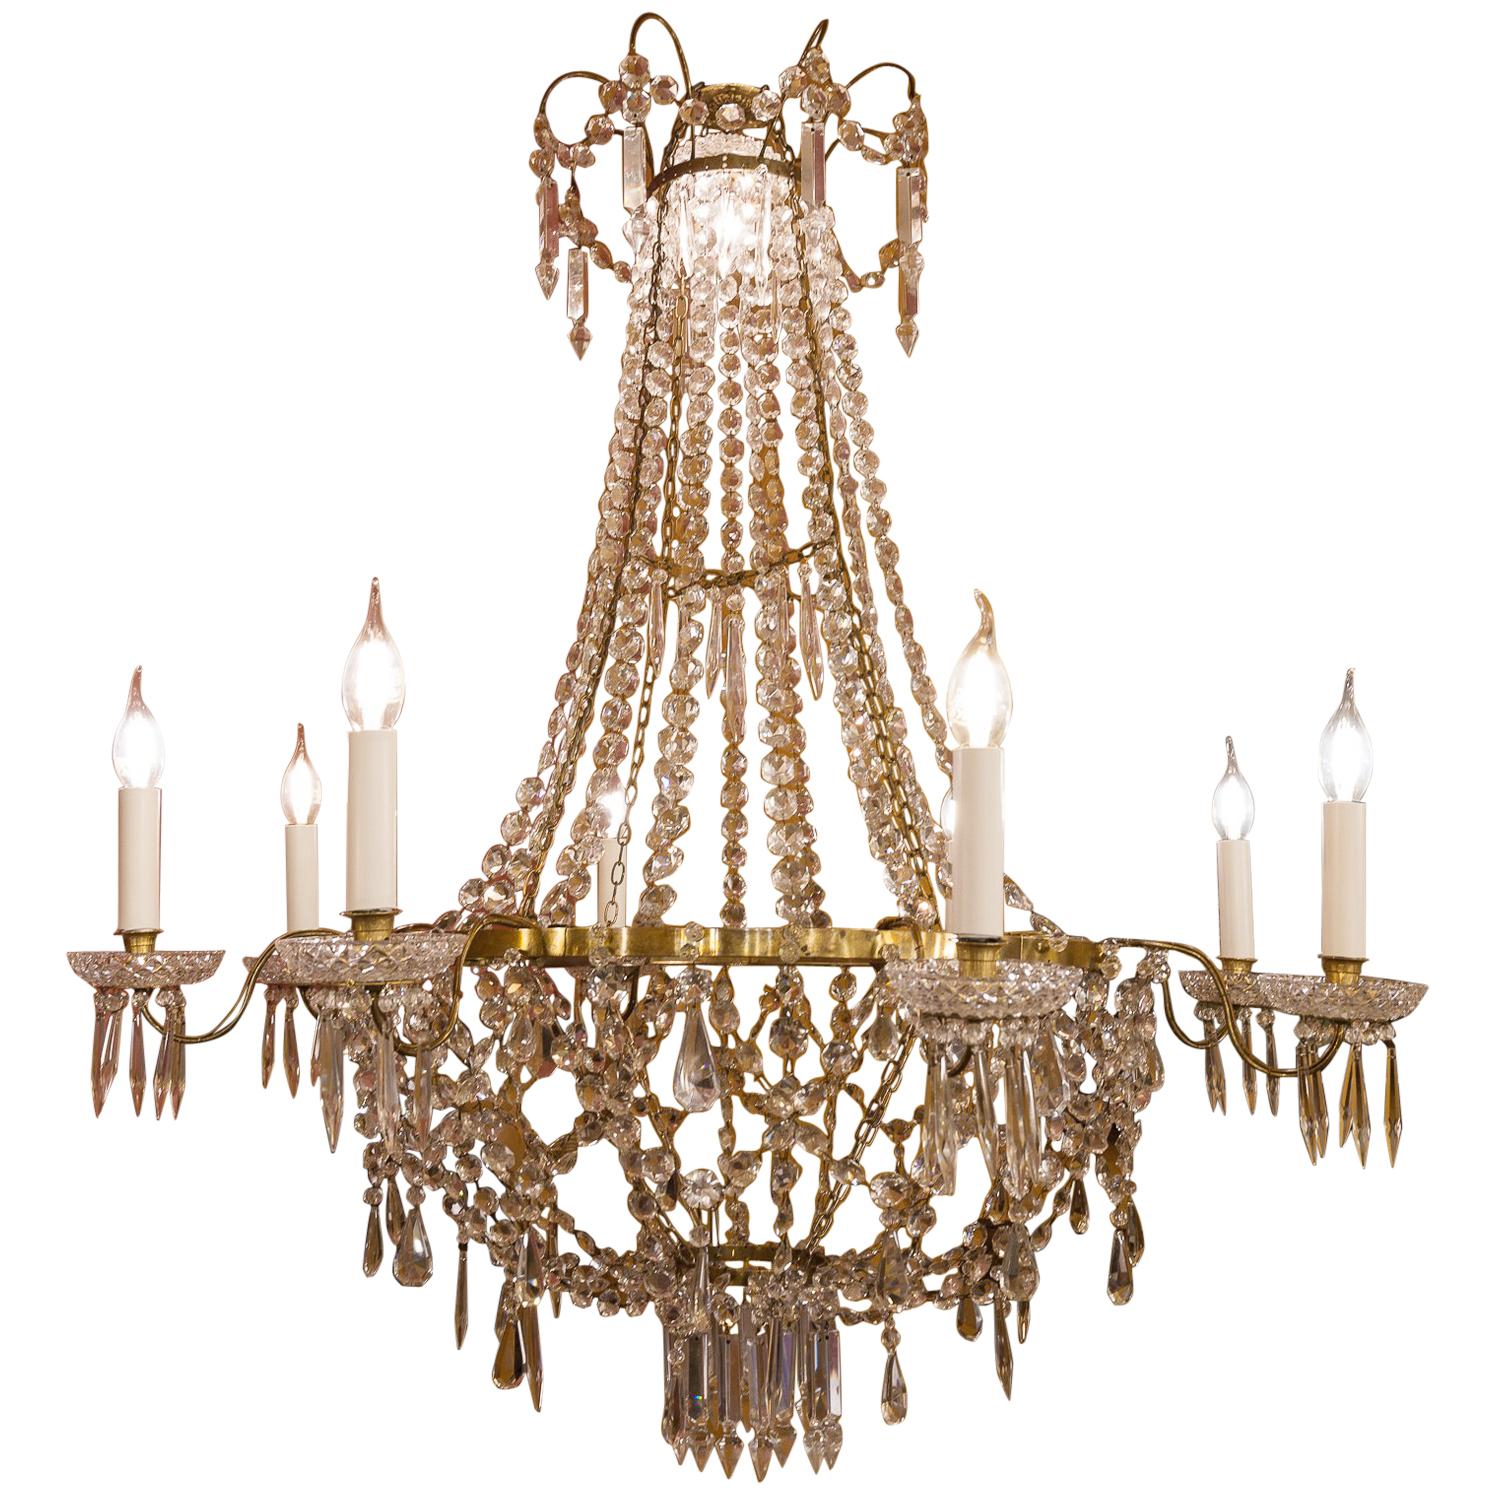 French Empire Style, Gilt Bronze and Baccarat Crystal Chandelier, circa 1890